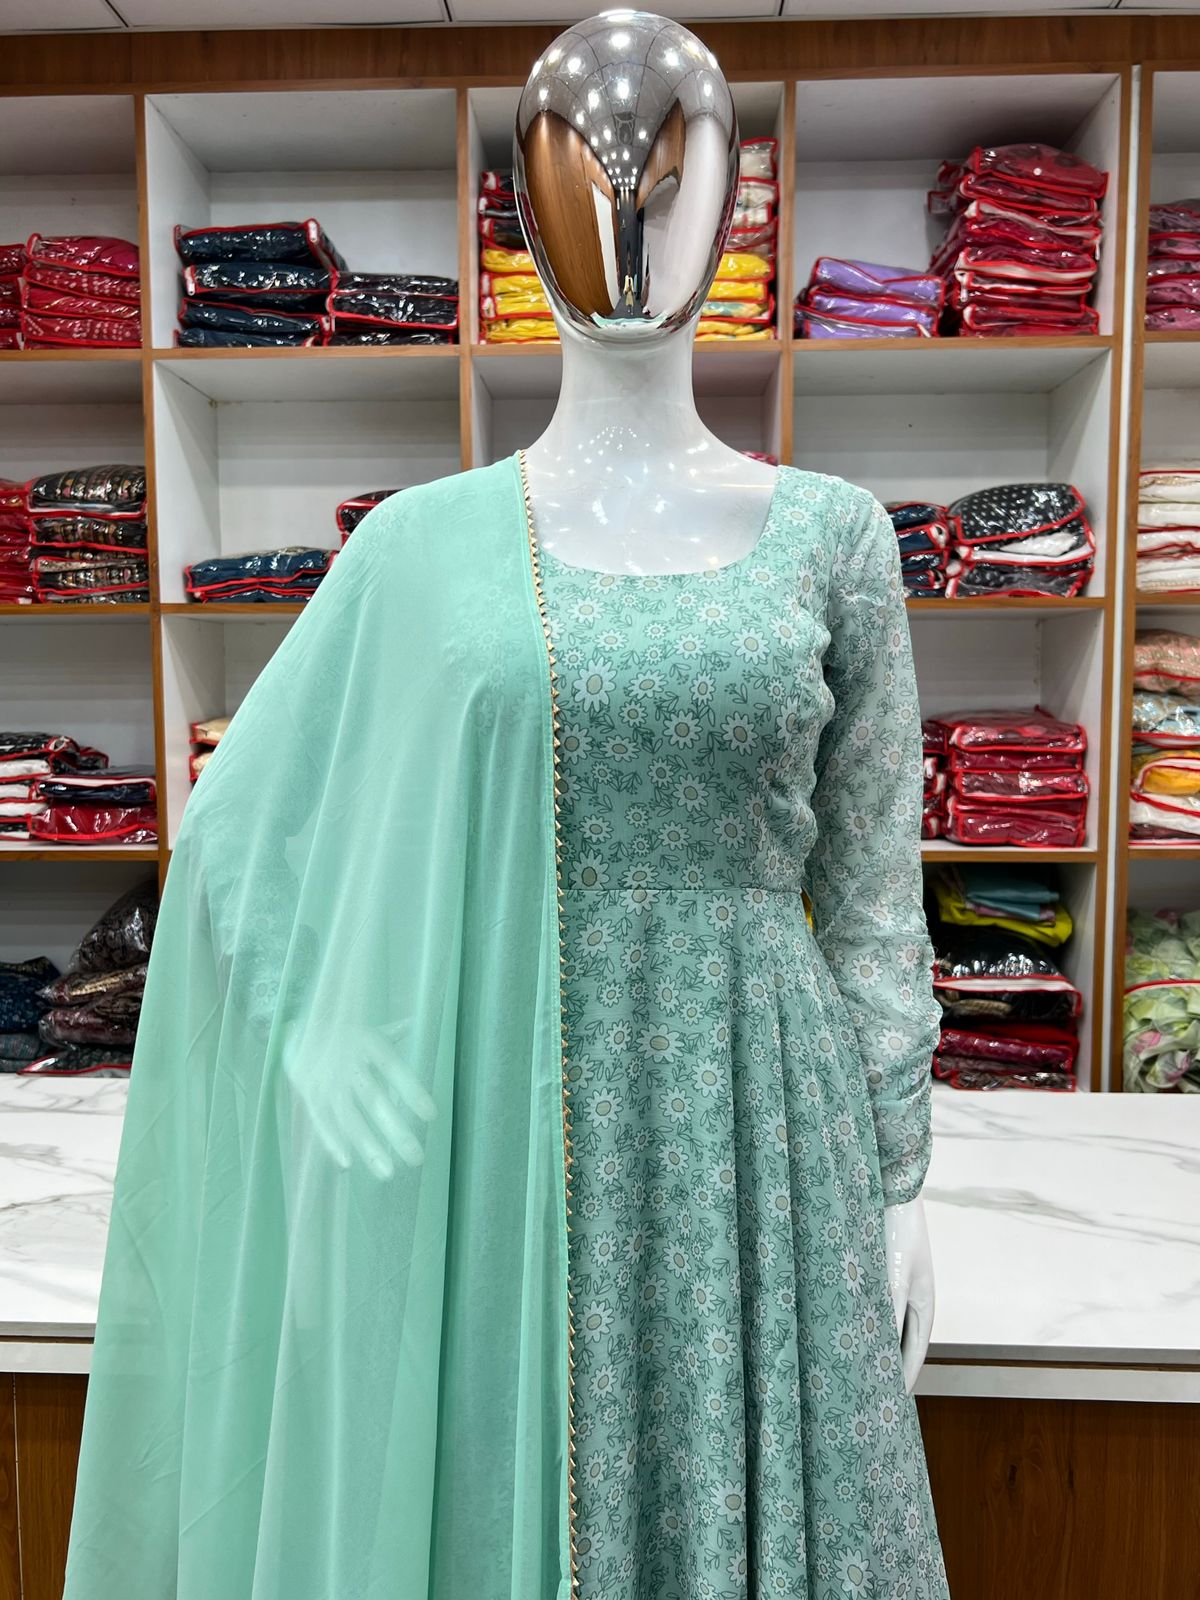 Low Price Offer on Kurta Sets for Women At Affordable Price